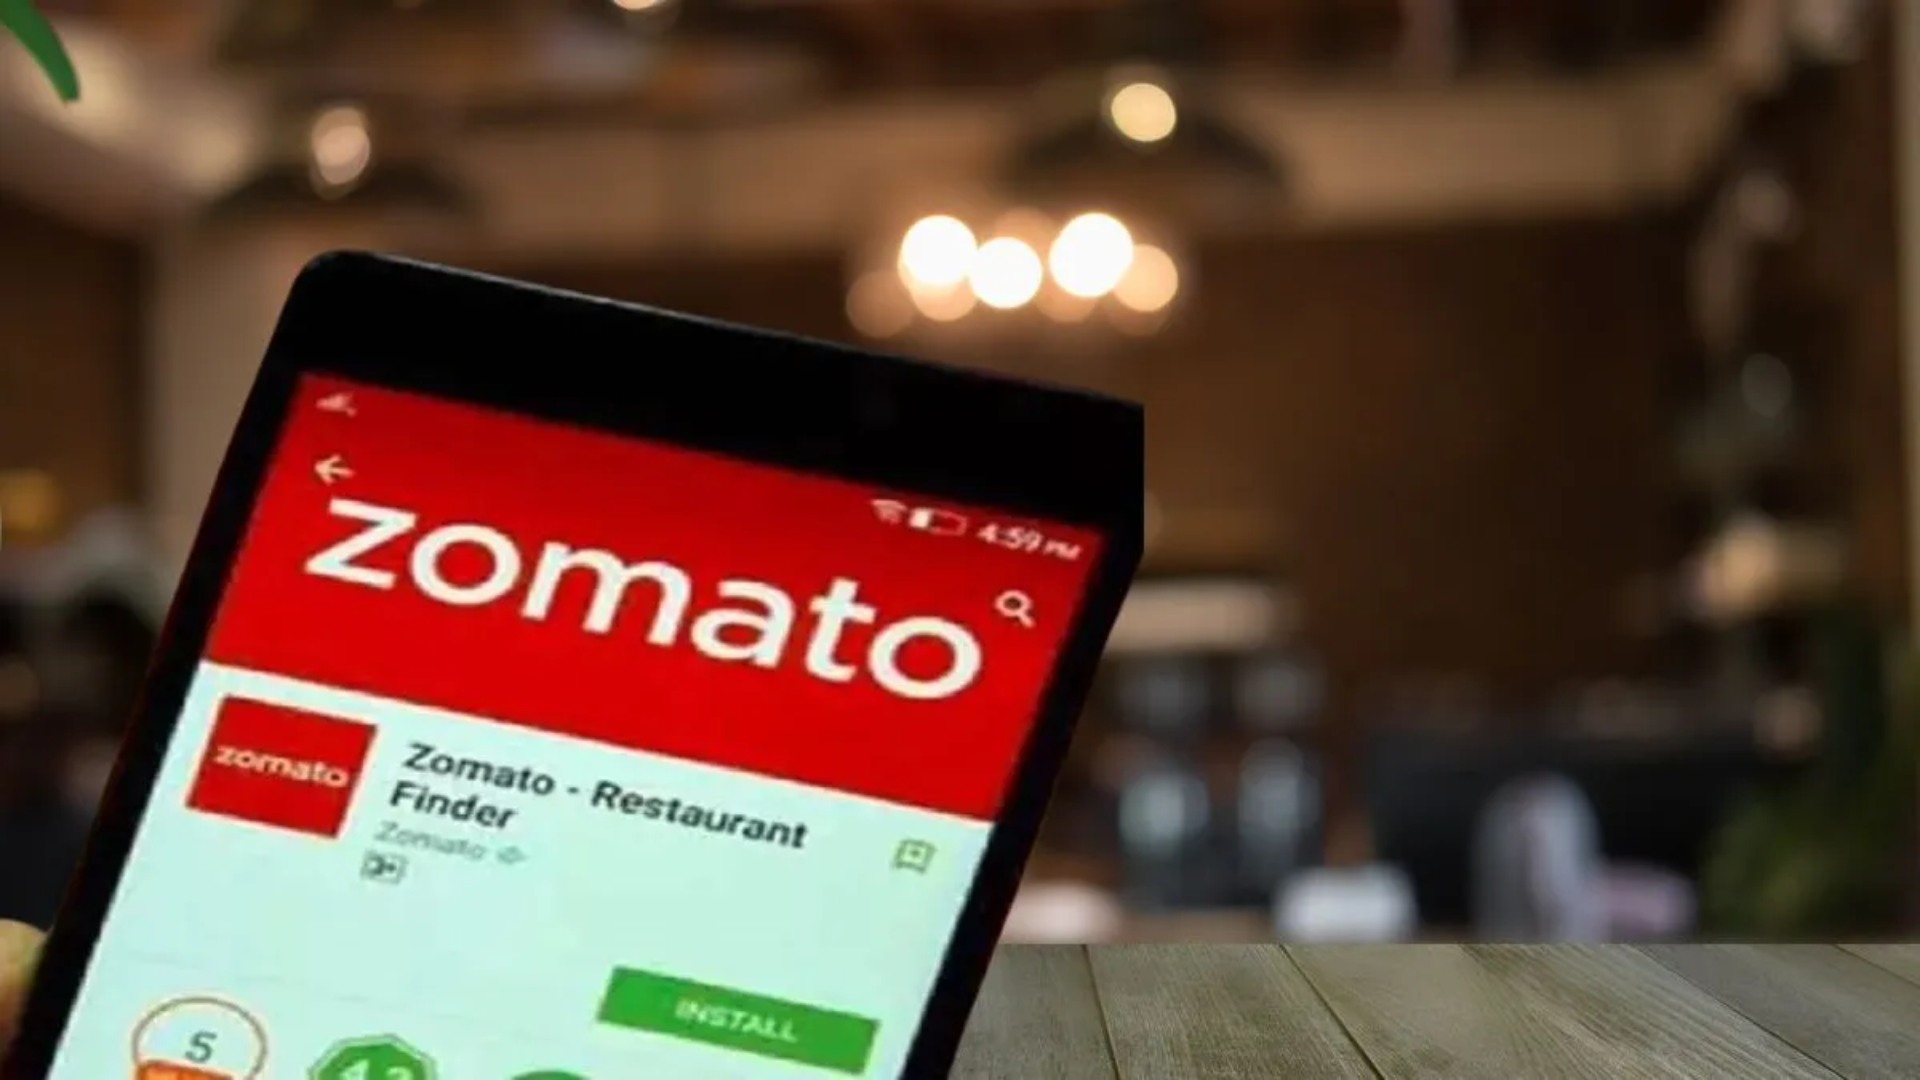 Zomato boosts platform fee to Rs 5 per order, up 25%